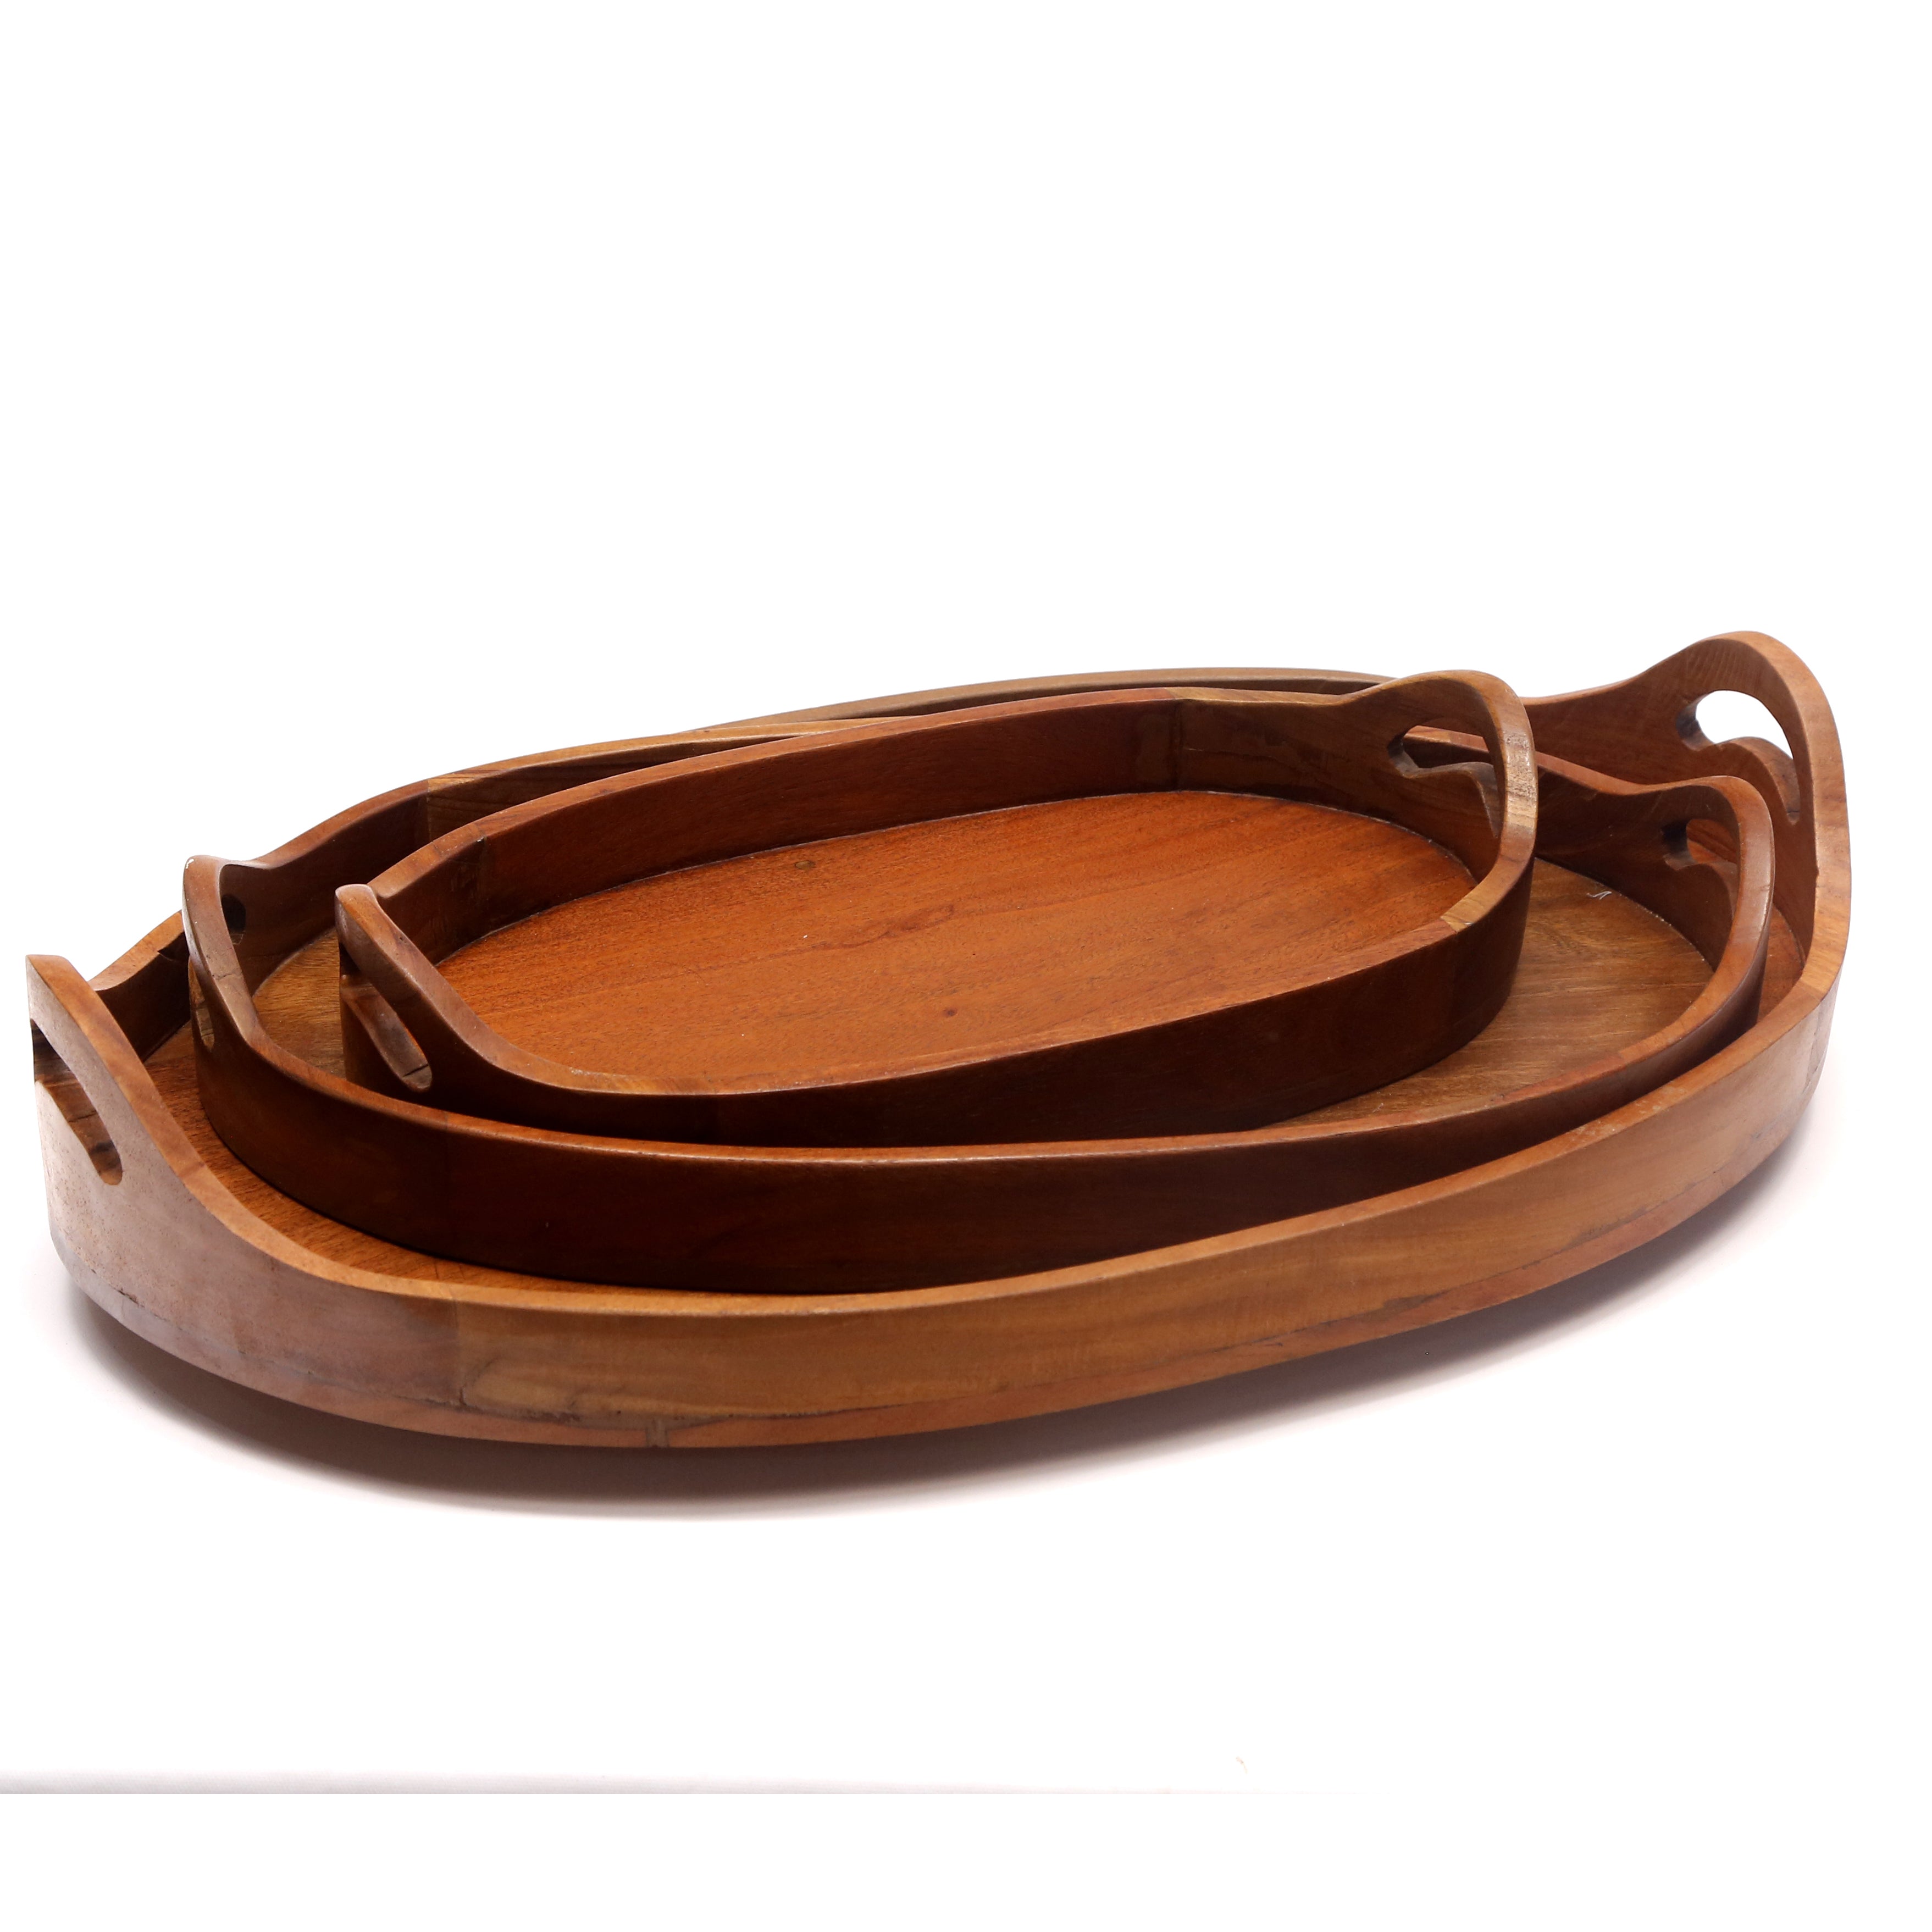 Oval Solid Wood Tray - - Set of 3 Tray